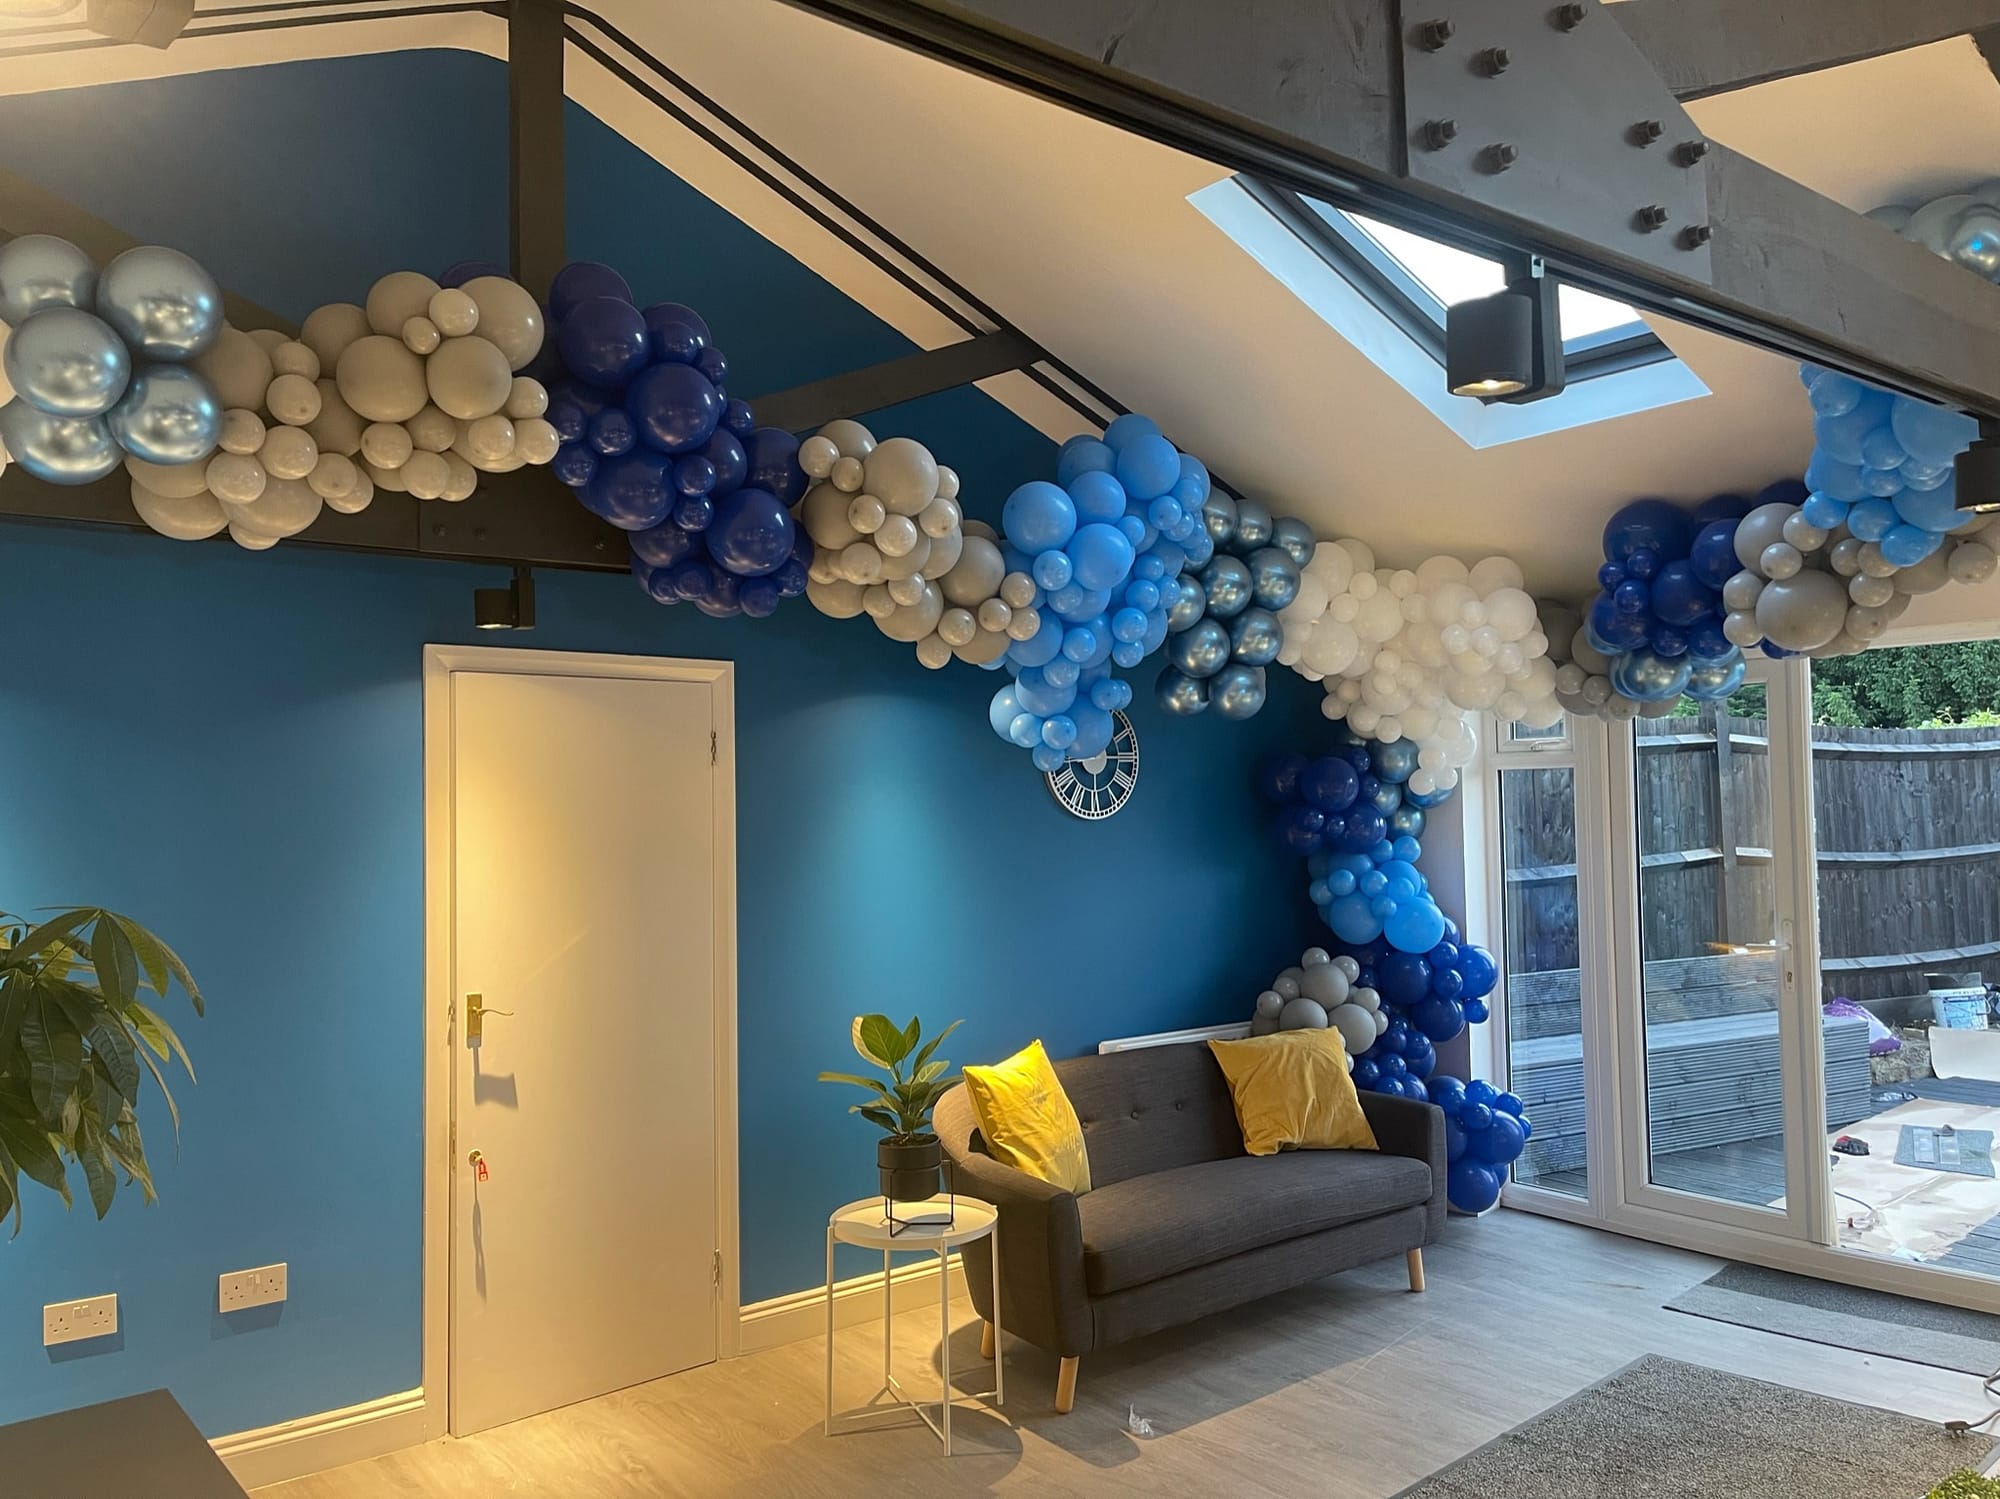 Blue, white and purple balloons